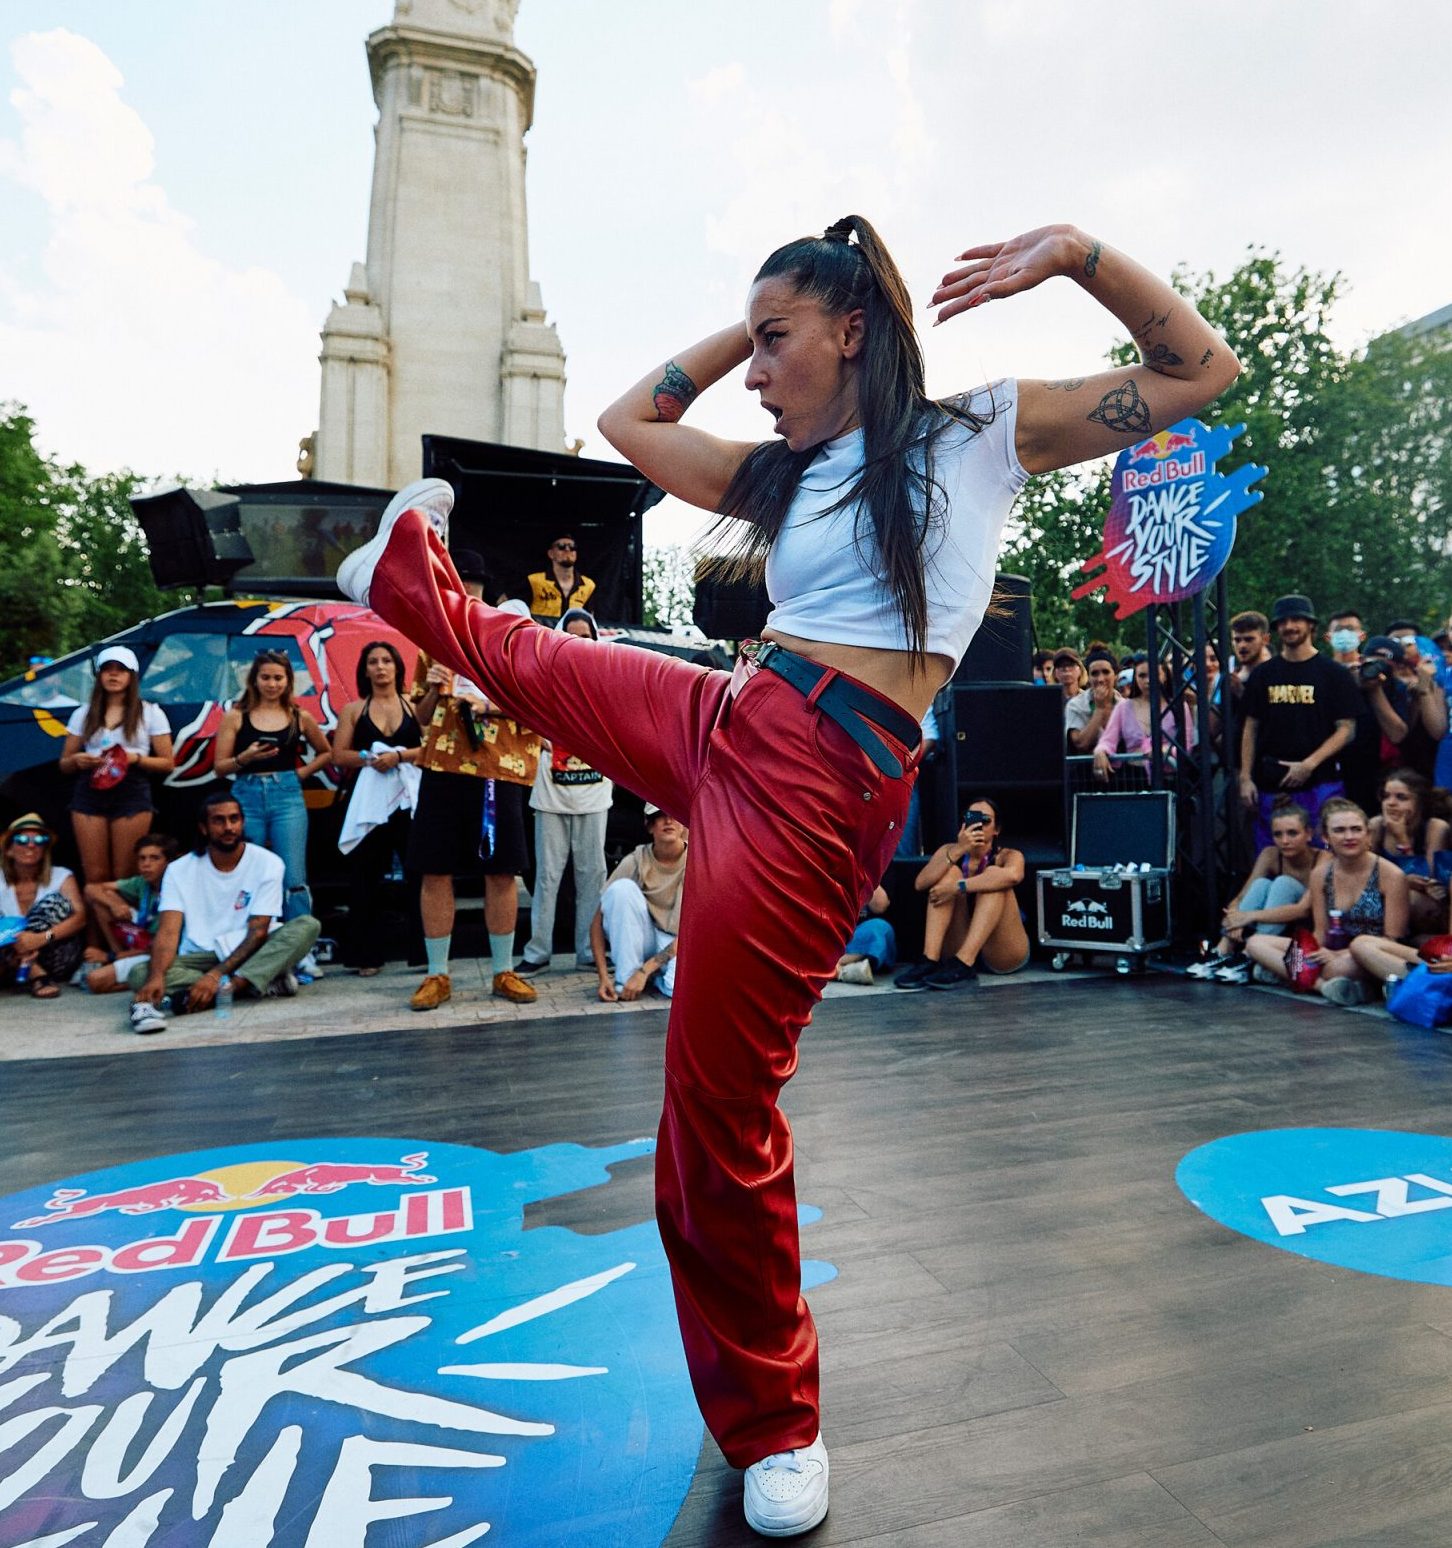 Concorrente Red Bull Dance Your Style